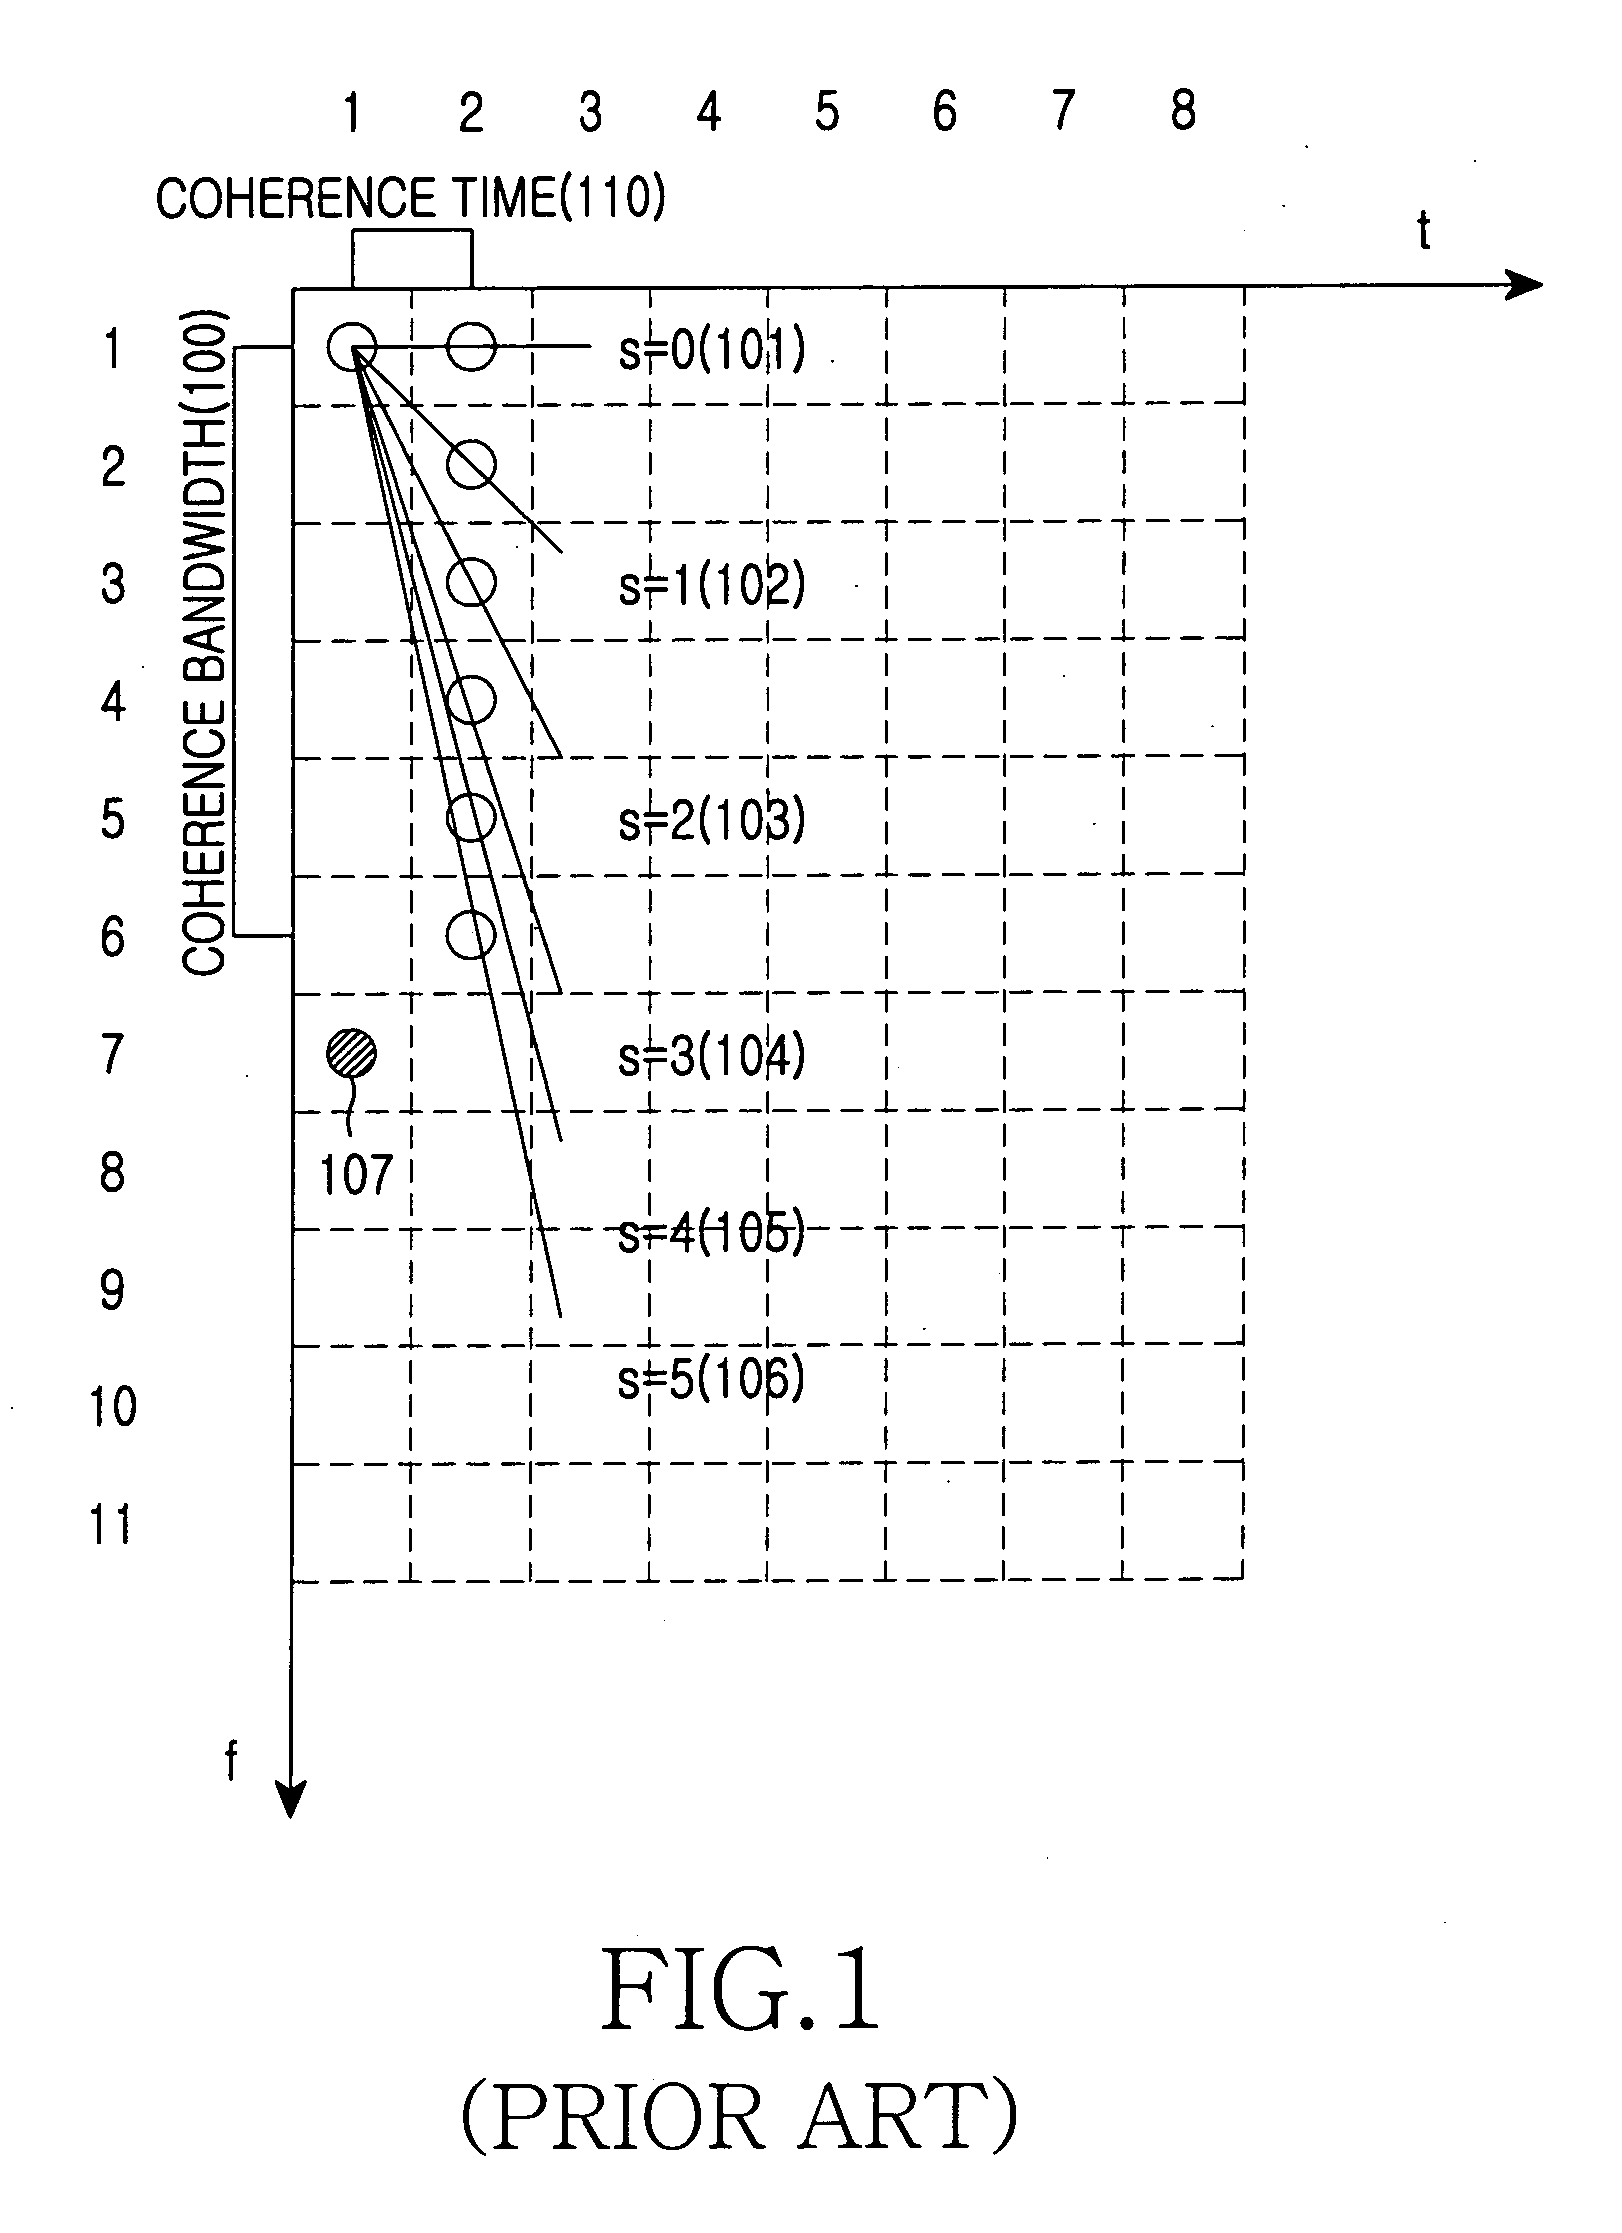 Apparatus and method for transmitting/receiving pilot signal in communication system using OFDM scheme